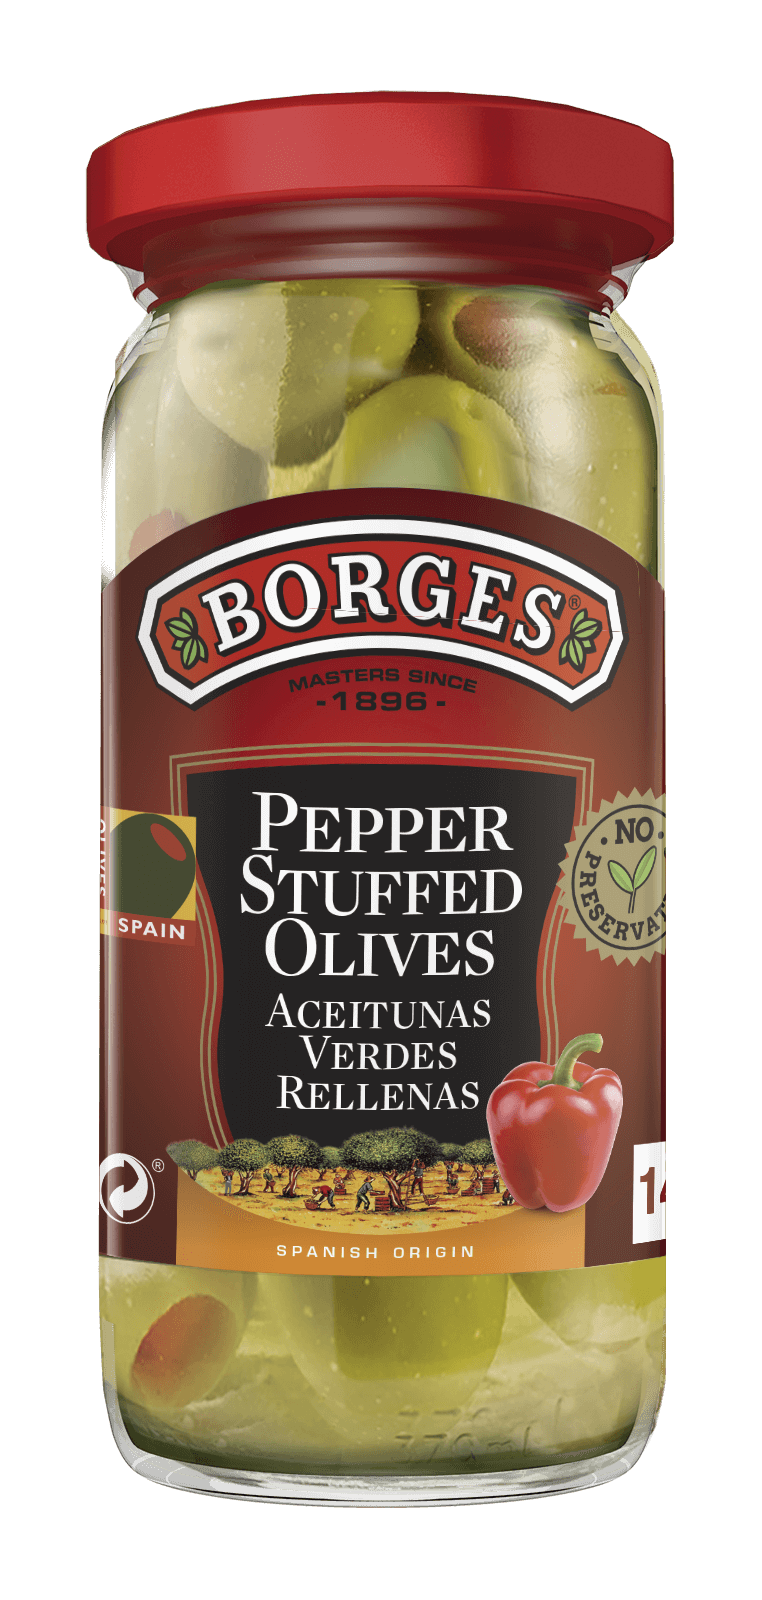 Stuffed bell peppers - Borges India